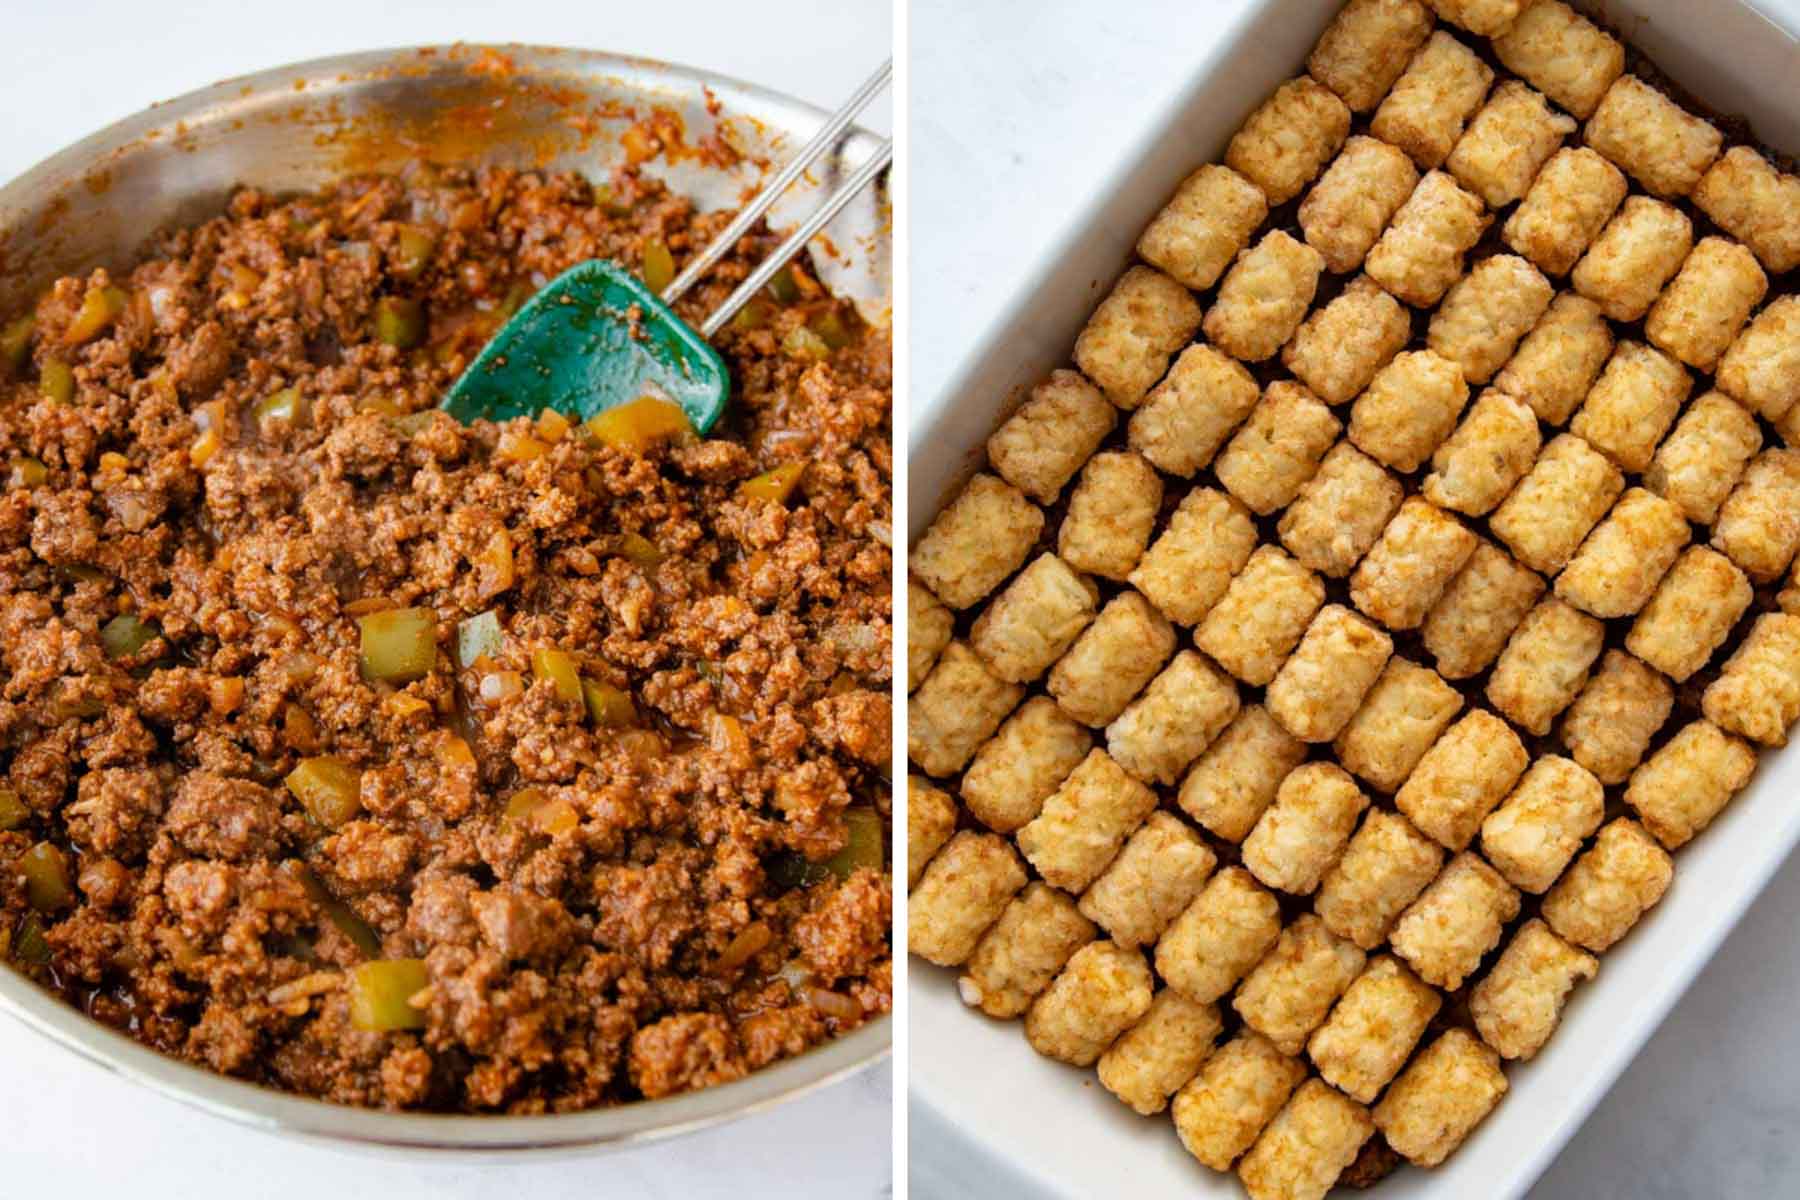 images showing how to assemble sloppy joe casserole